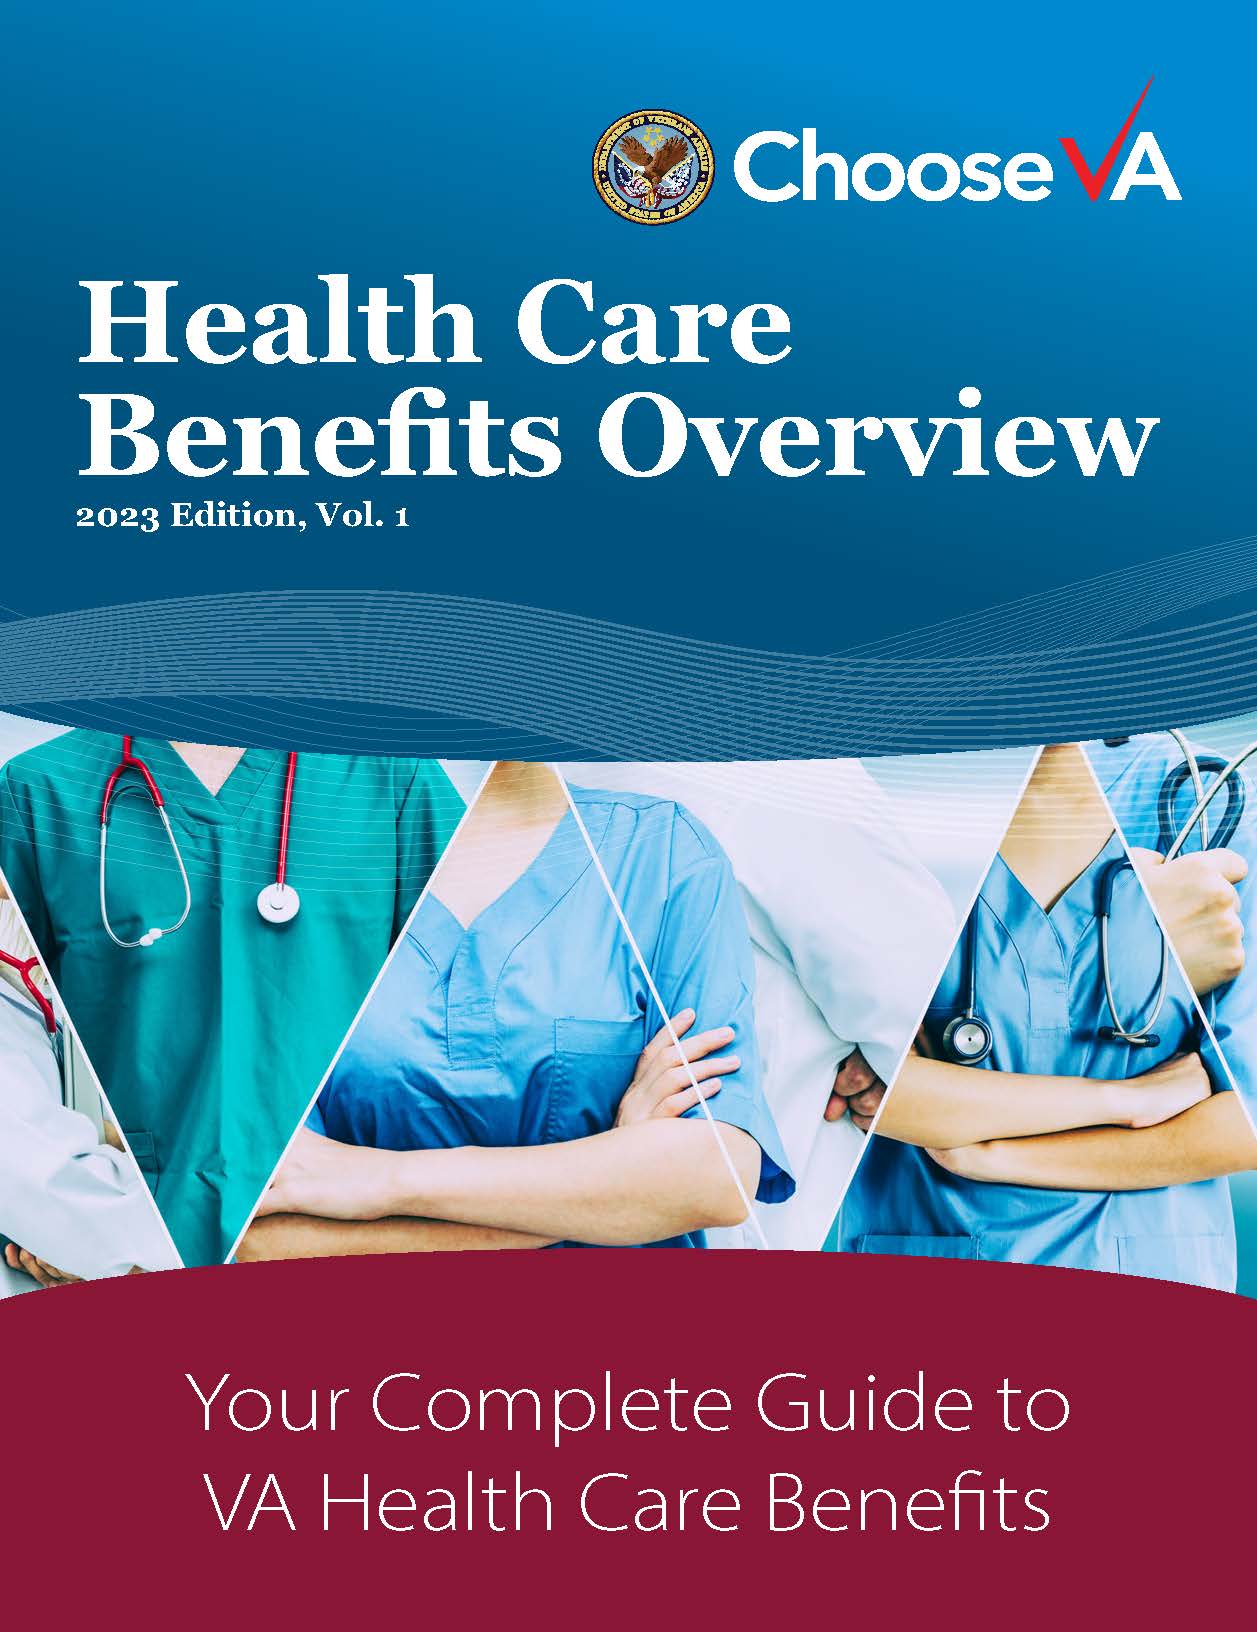 IB 10-185 Health Care Benefits Overview 2023 V1